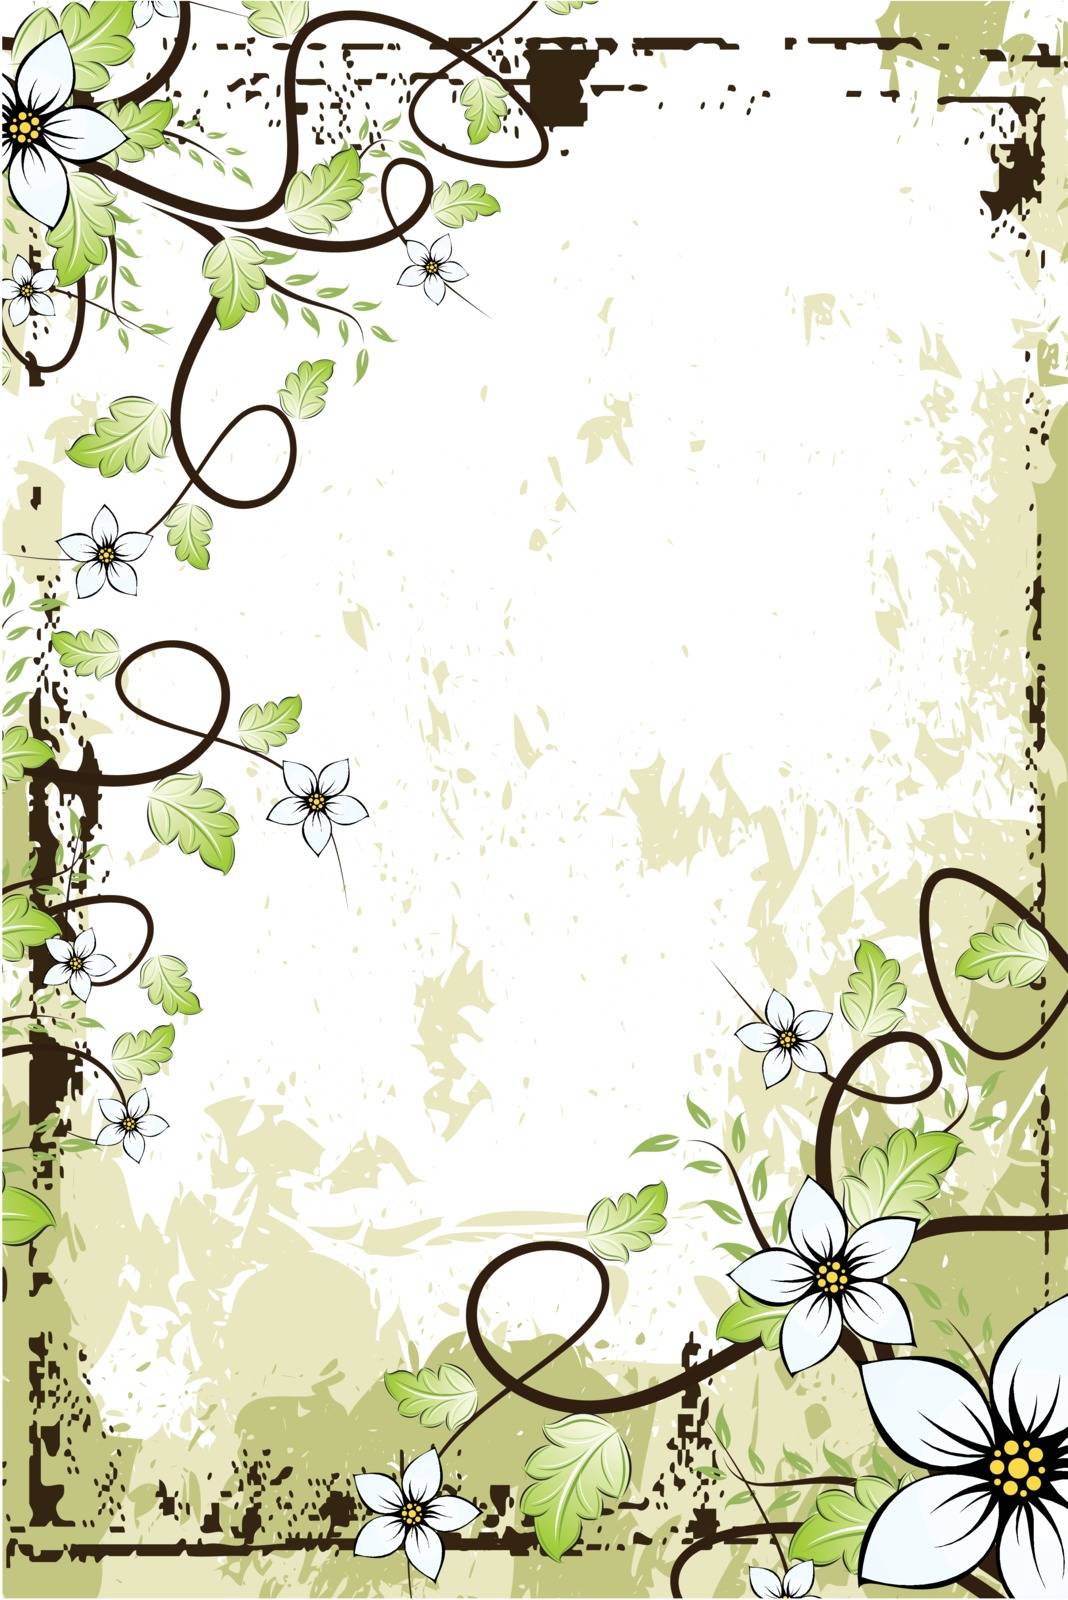 Grunge floral background by WaD